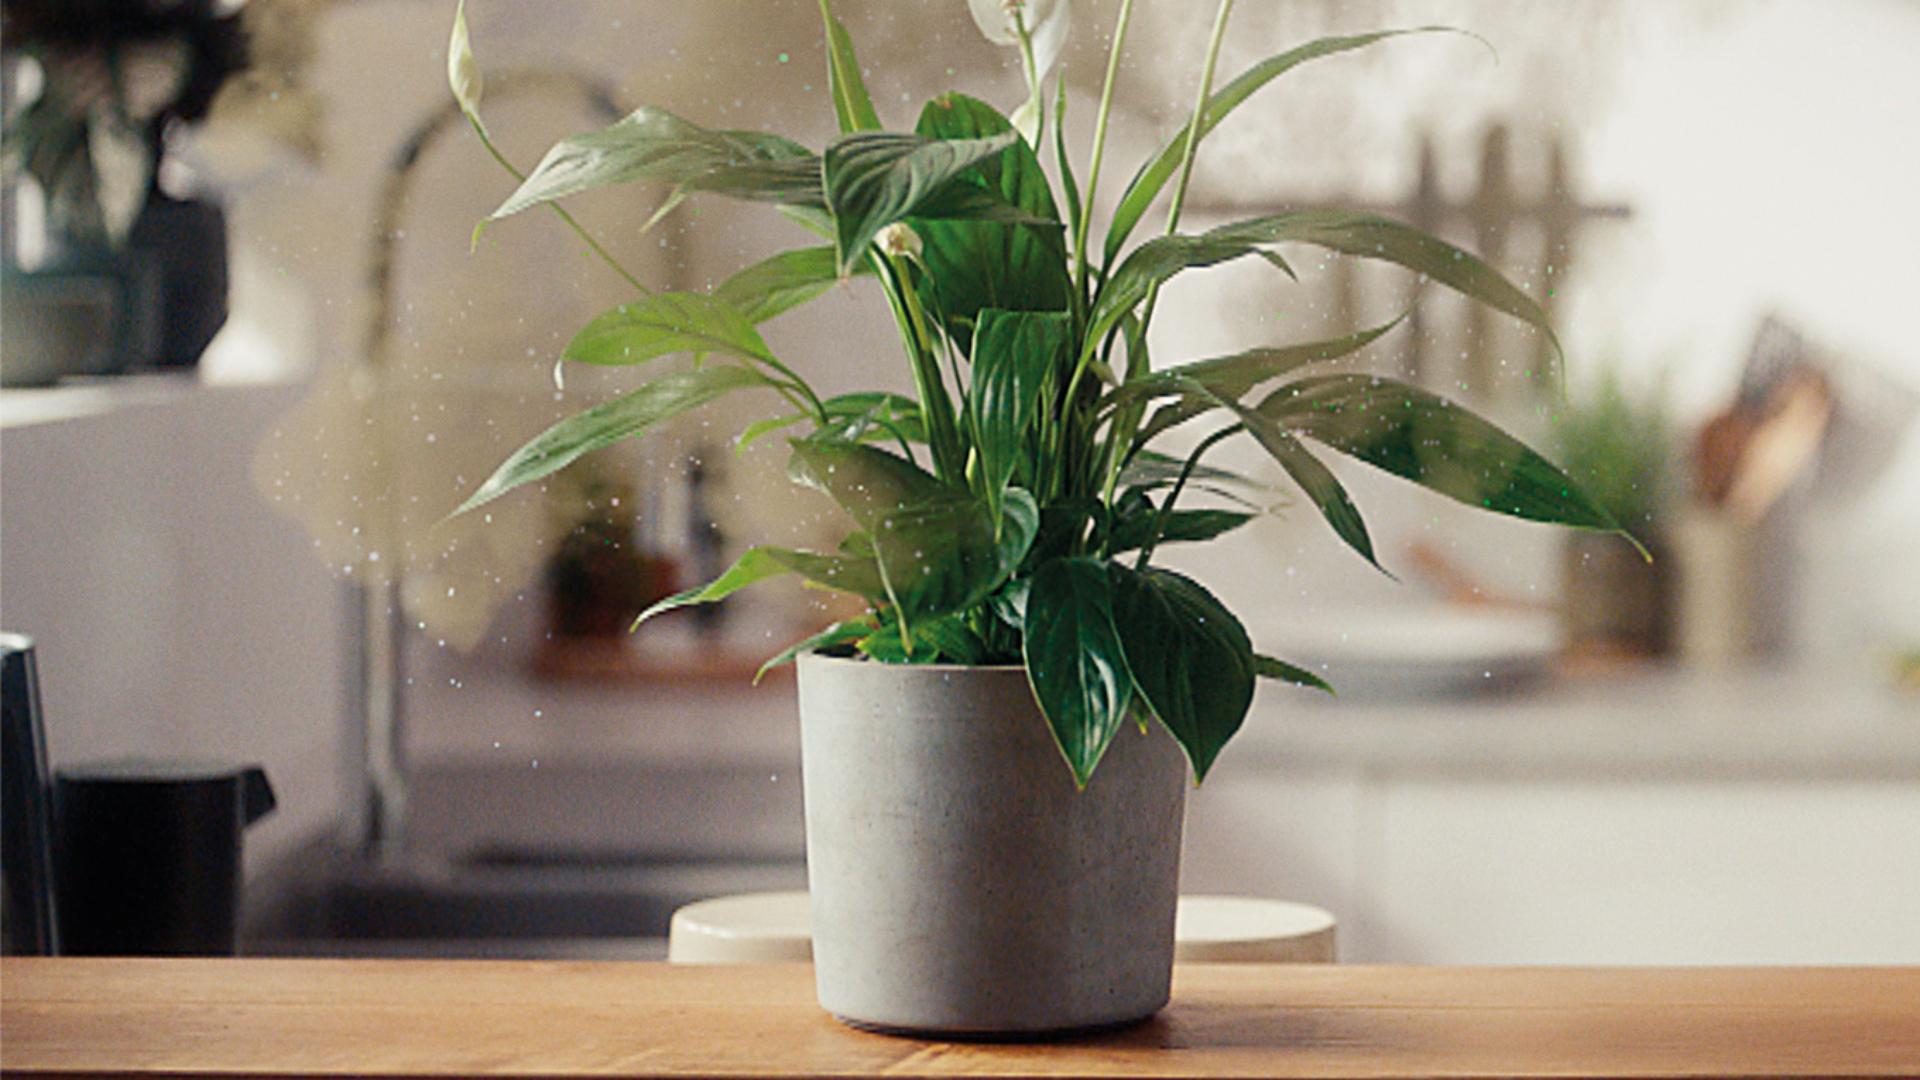 A house plant in a kitchen.